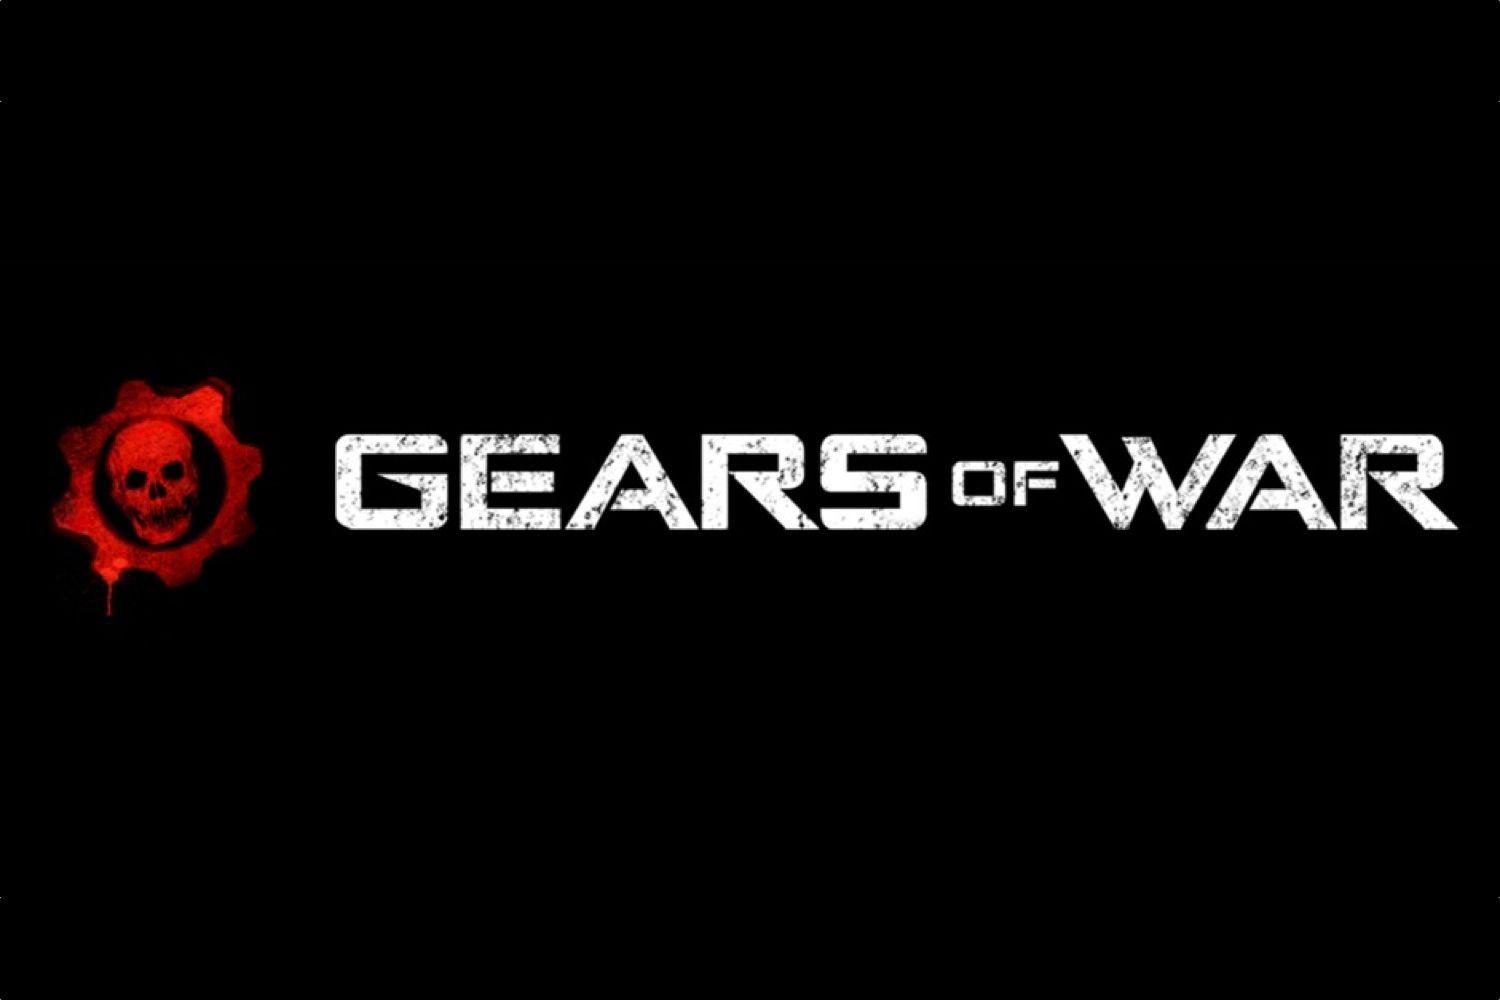 Former Microsoft Logo - Microsoft Locks Up Gears of War Forever, Snatches Former Series